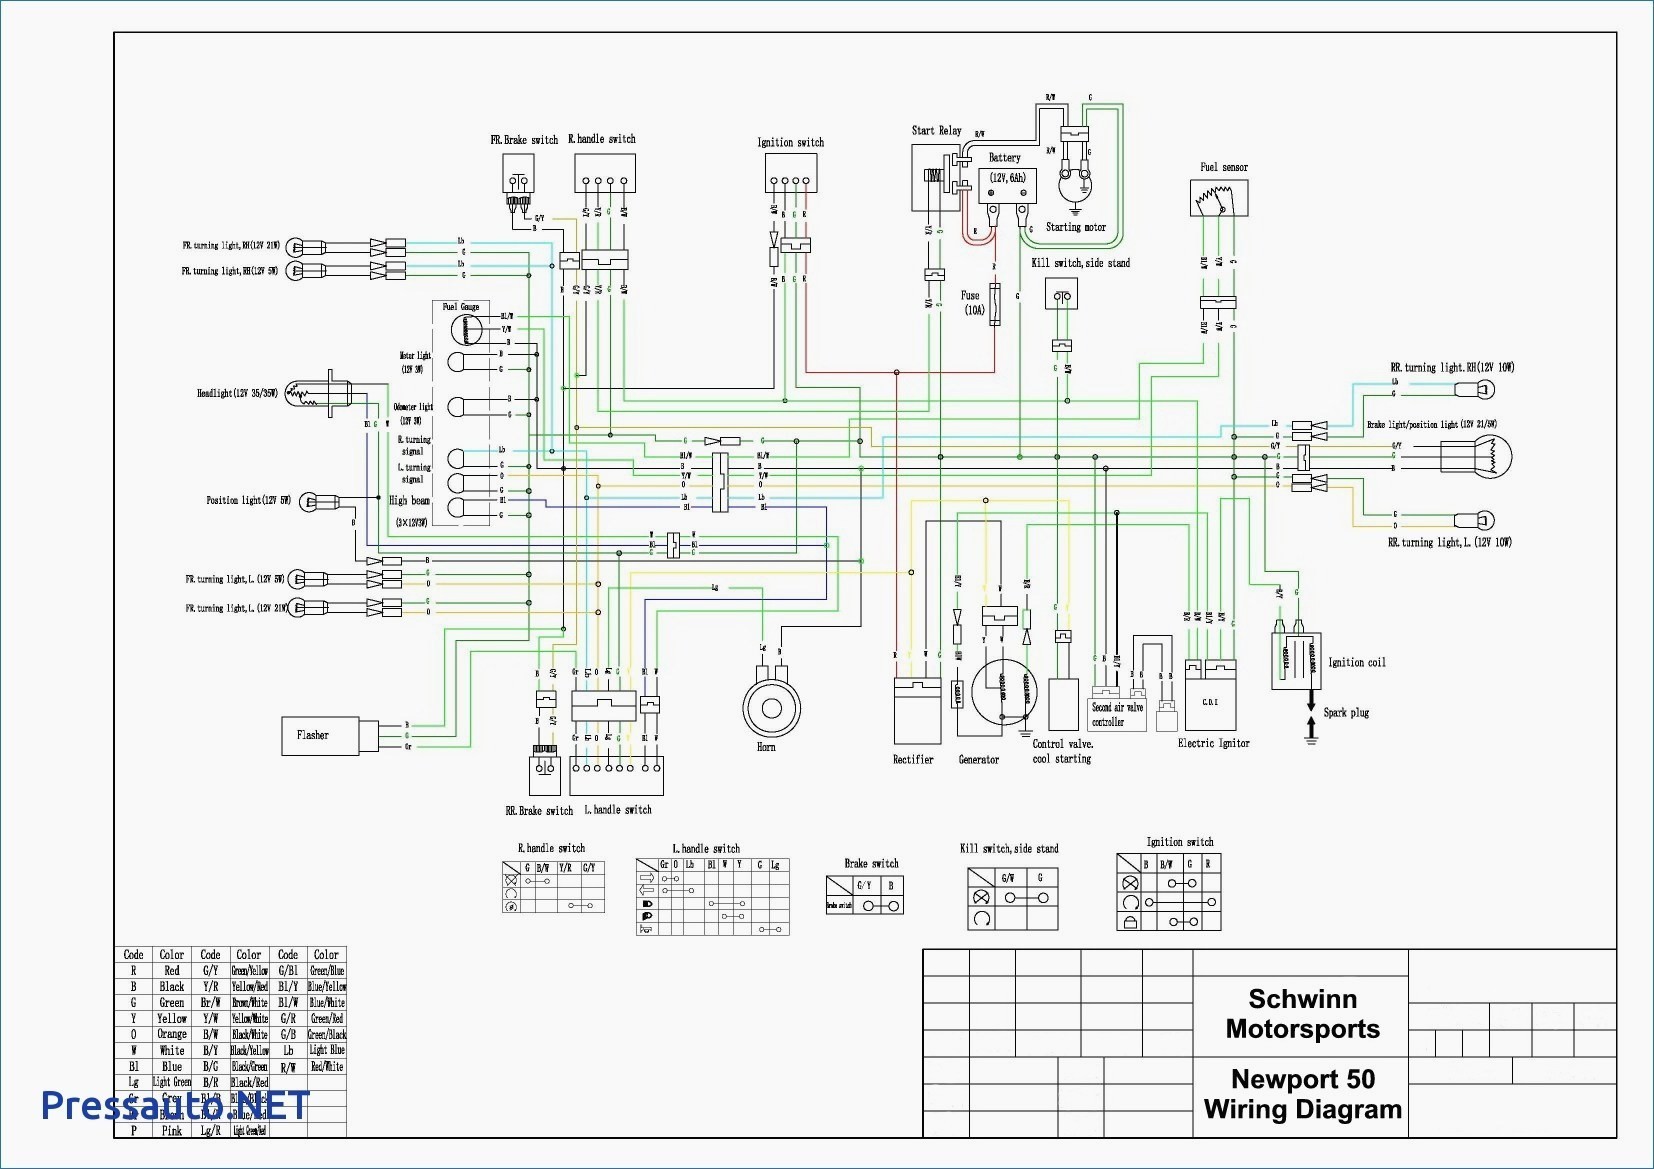 Wiring Diagram for Race Car New Pride Legend Wiring Diagram Fresh Wiring Diagram for Legend Race